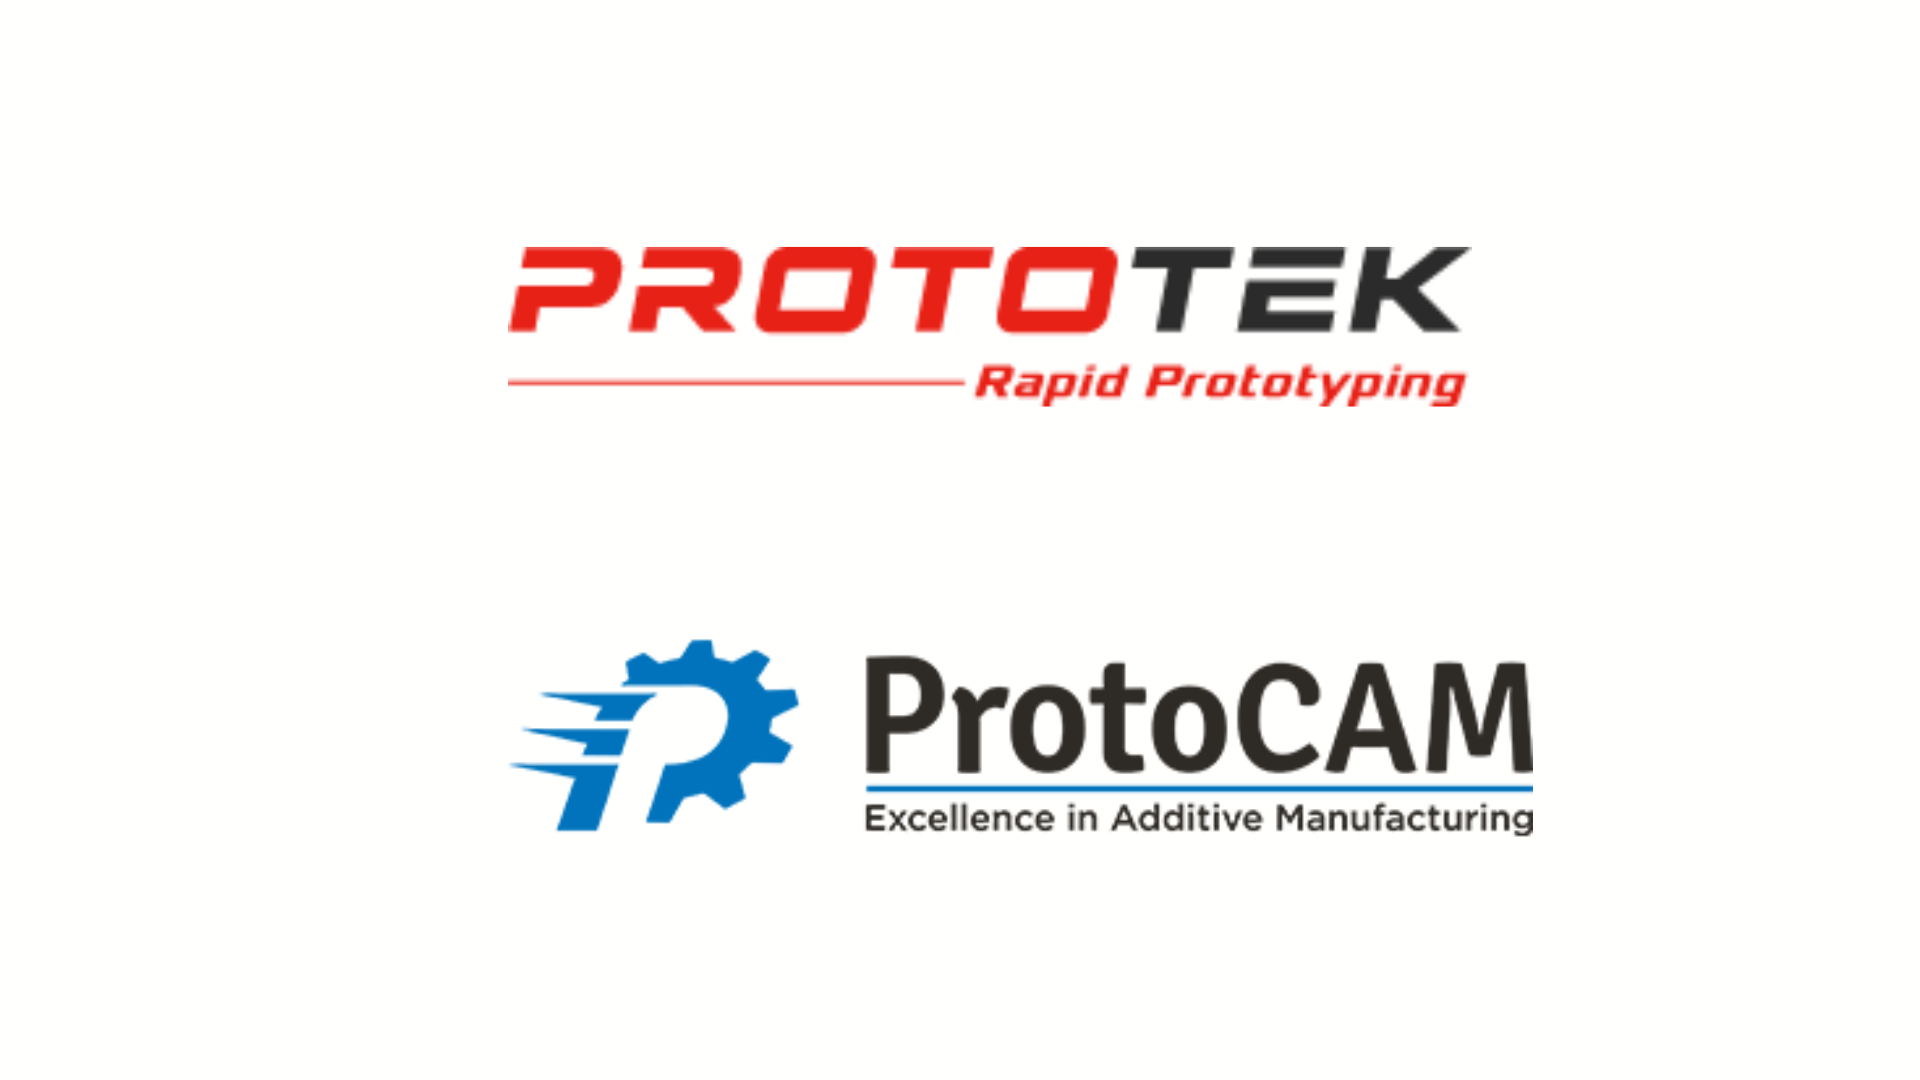 Prototek acquired ProtoCAM, an industrial 3D printing company. ProtoCAM will merge into Midwest Prototyping, Prototek’s additive manufacturing arm